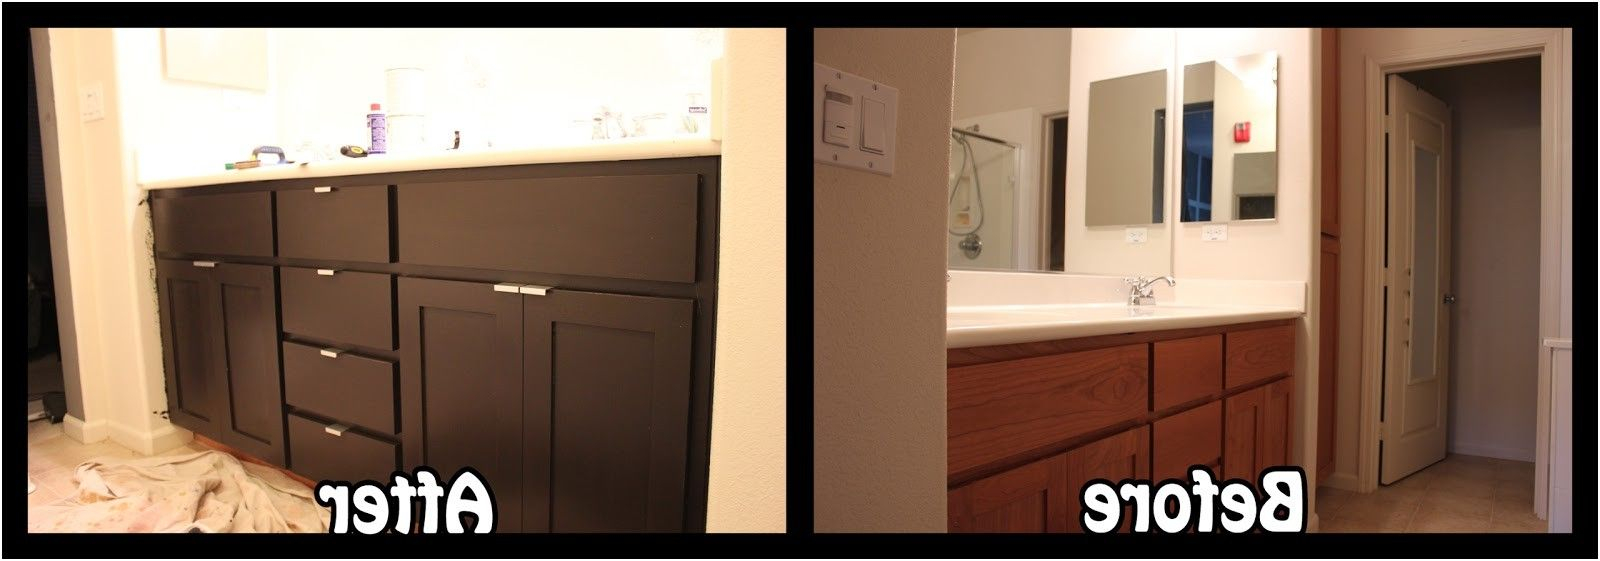 Refacing Bathroom Cabinets Before After Kitchen Cabinet Refacing throughout sizing 1600 X 561